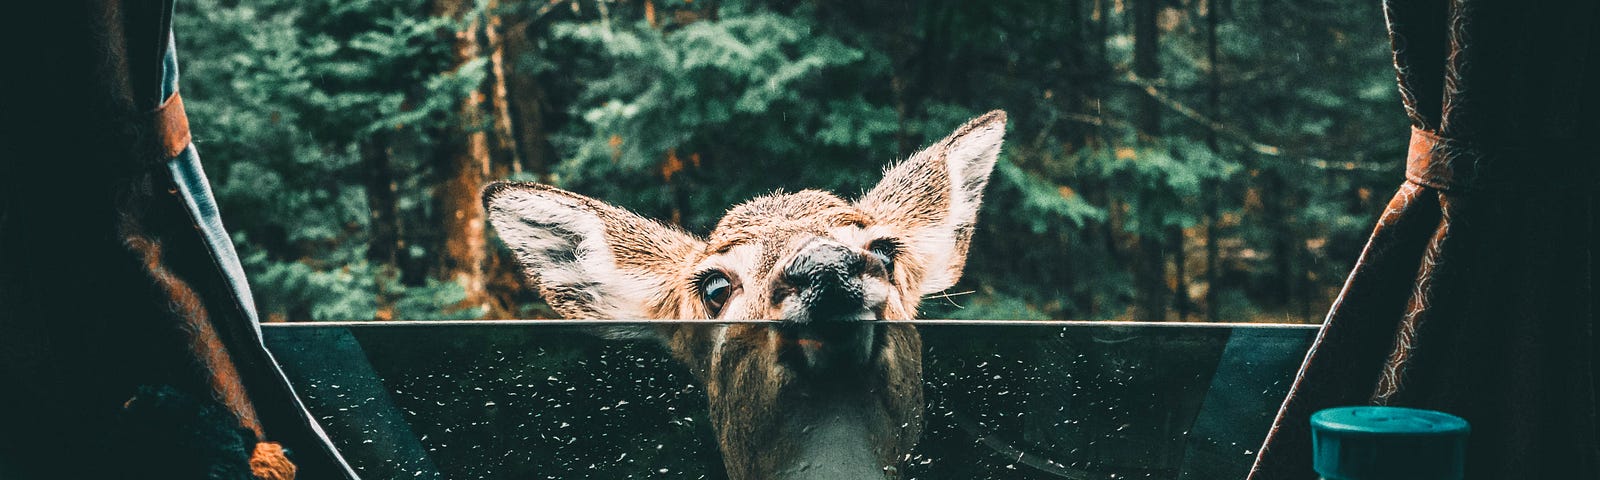 A deer peering over the open window of a camper, looking at a carrot.